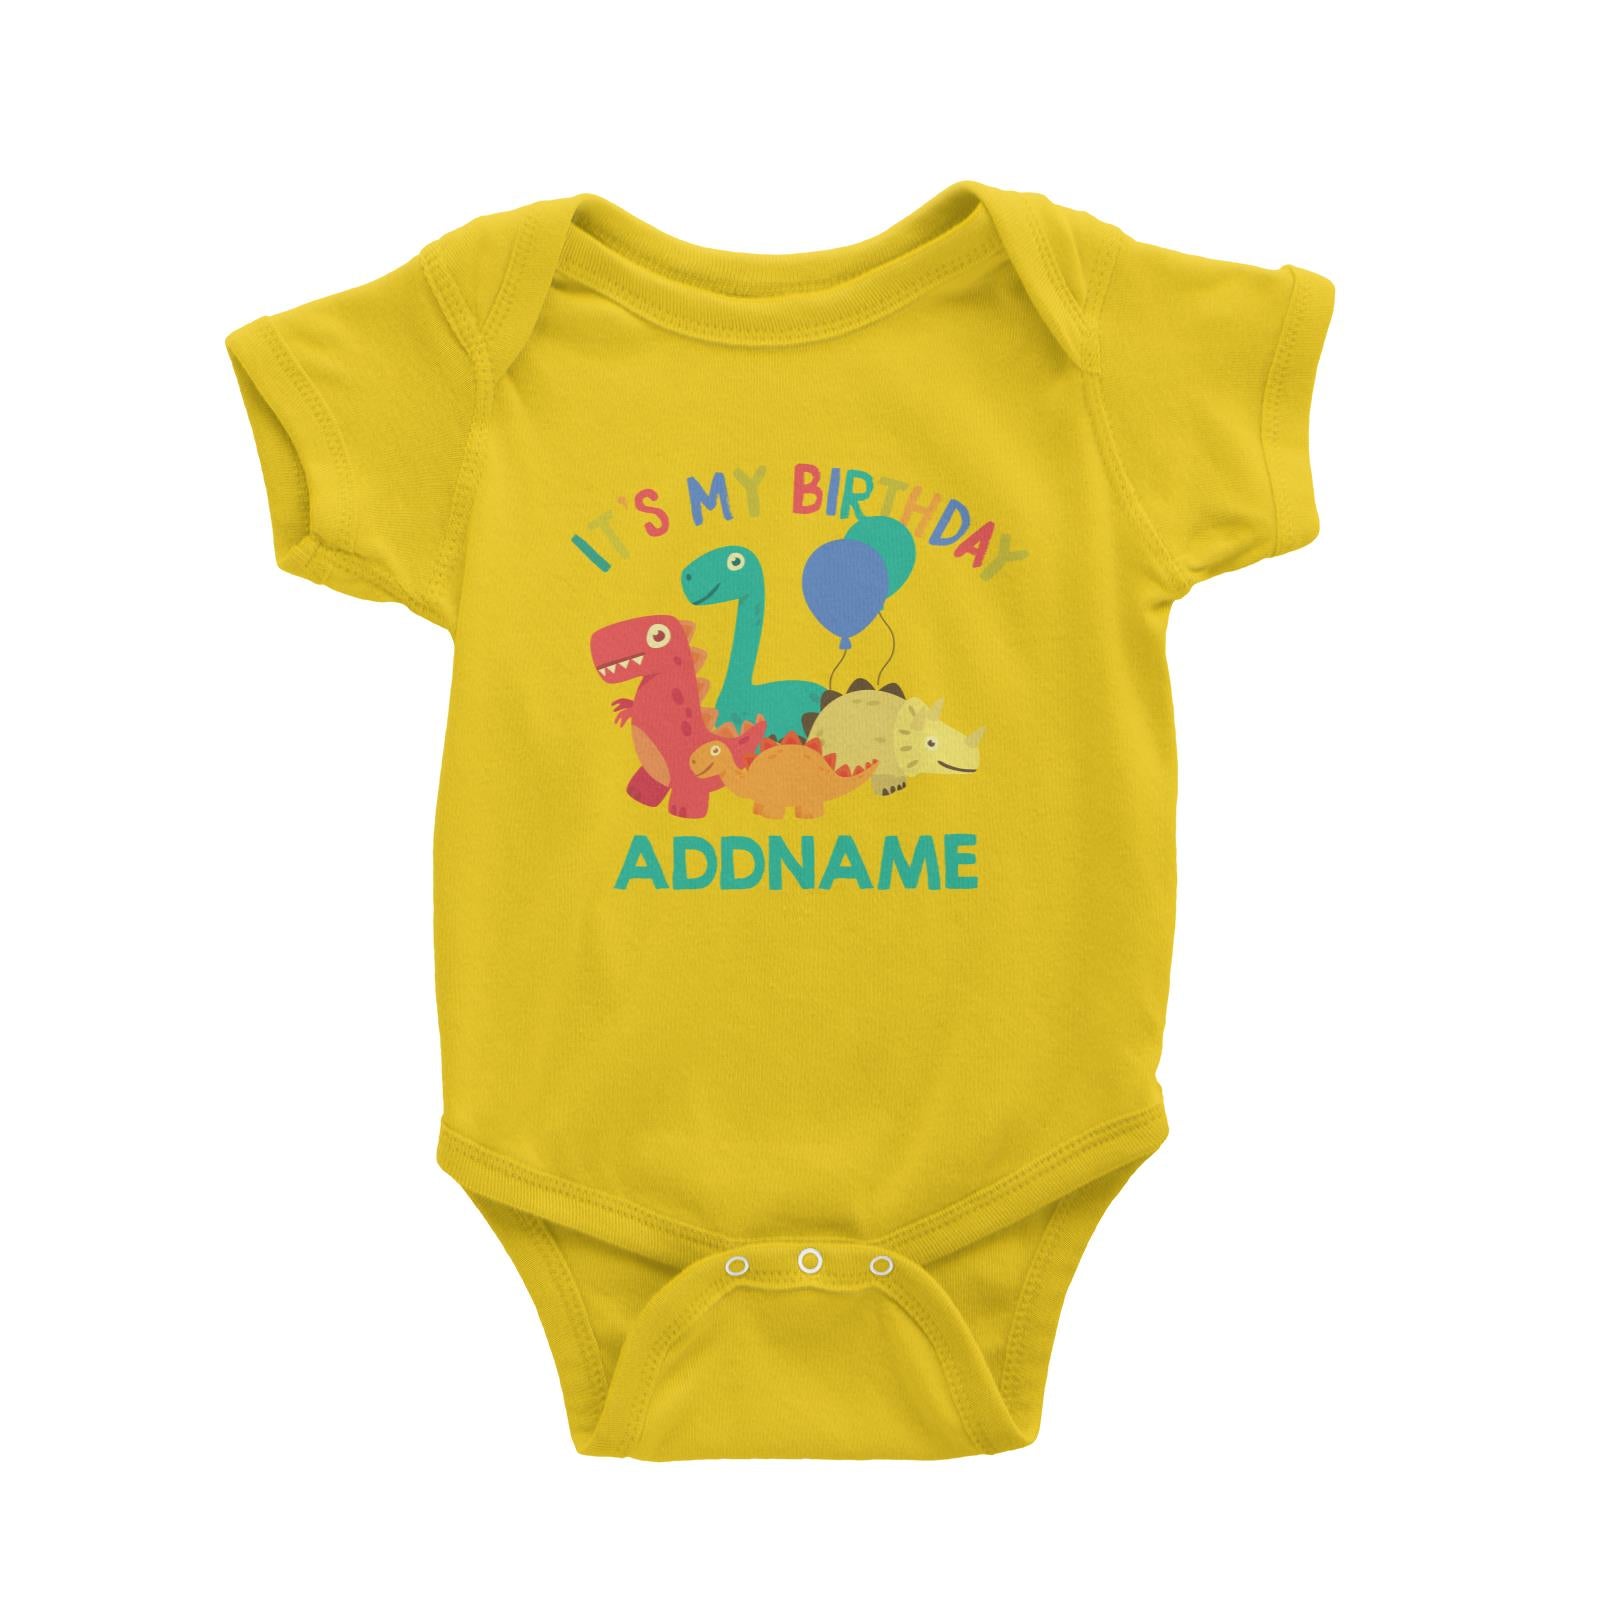 It's My Birthday Addname with Cute Dinosaurs and Balloons Birthday Theme Baby Romper